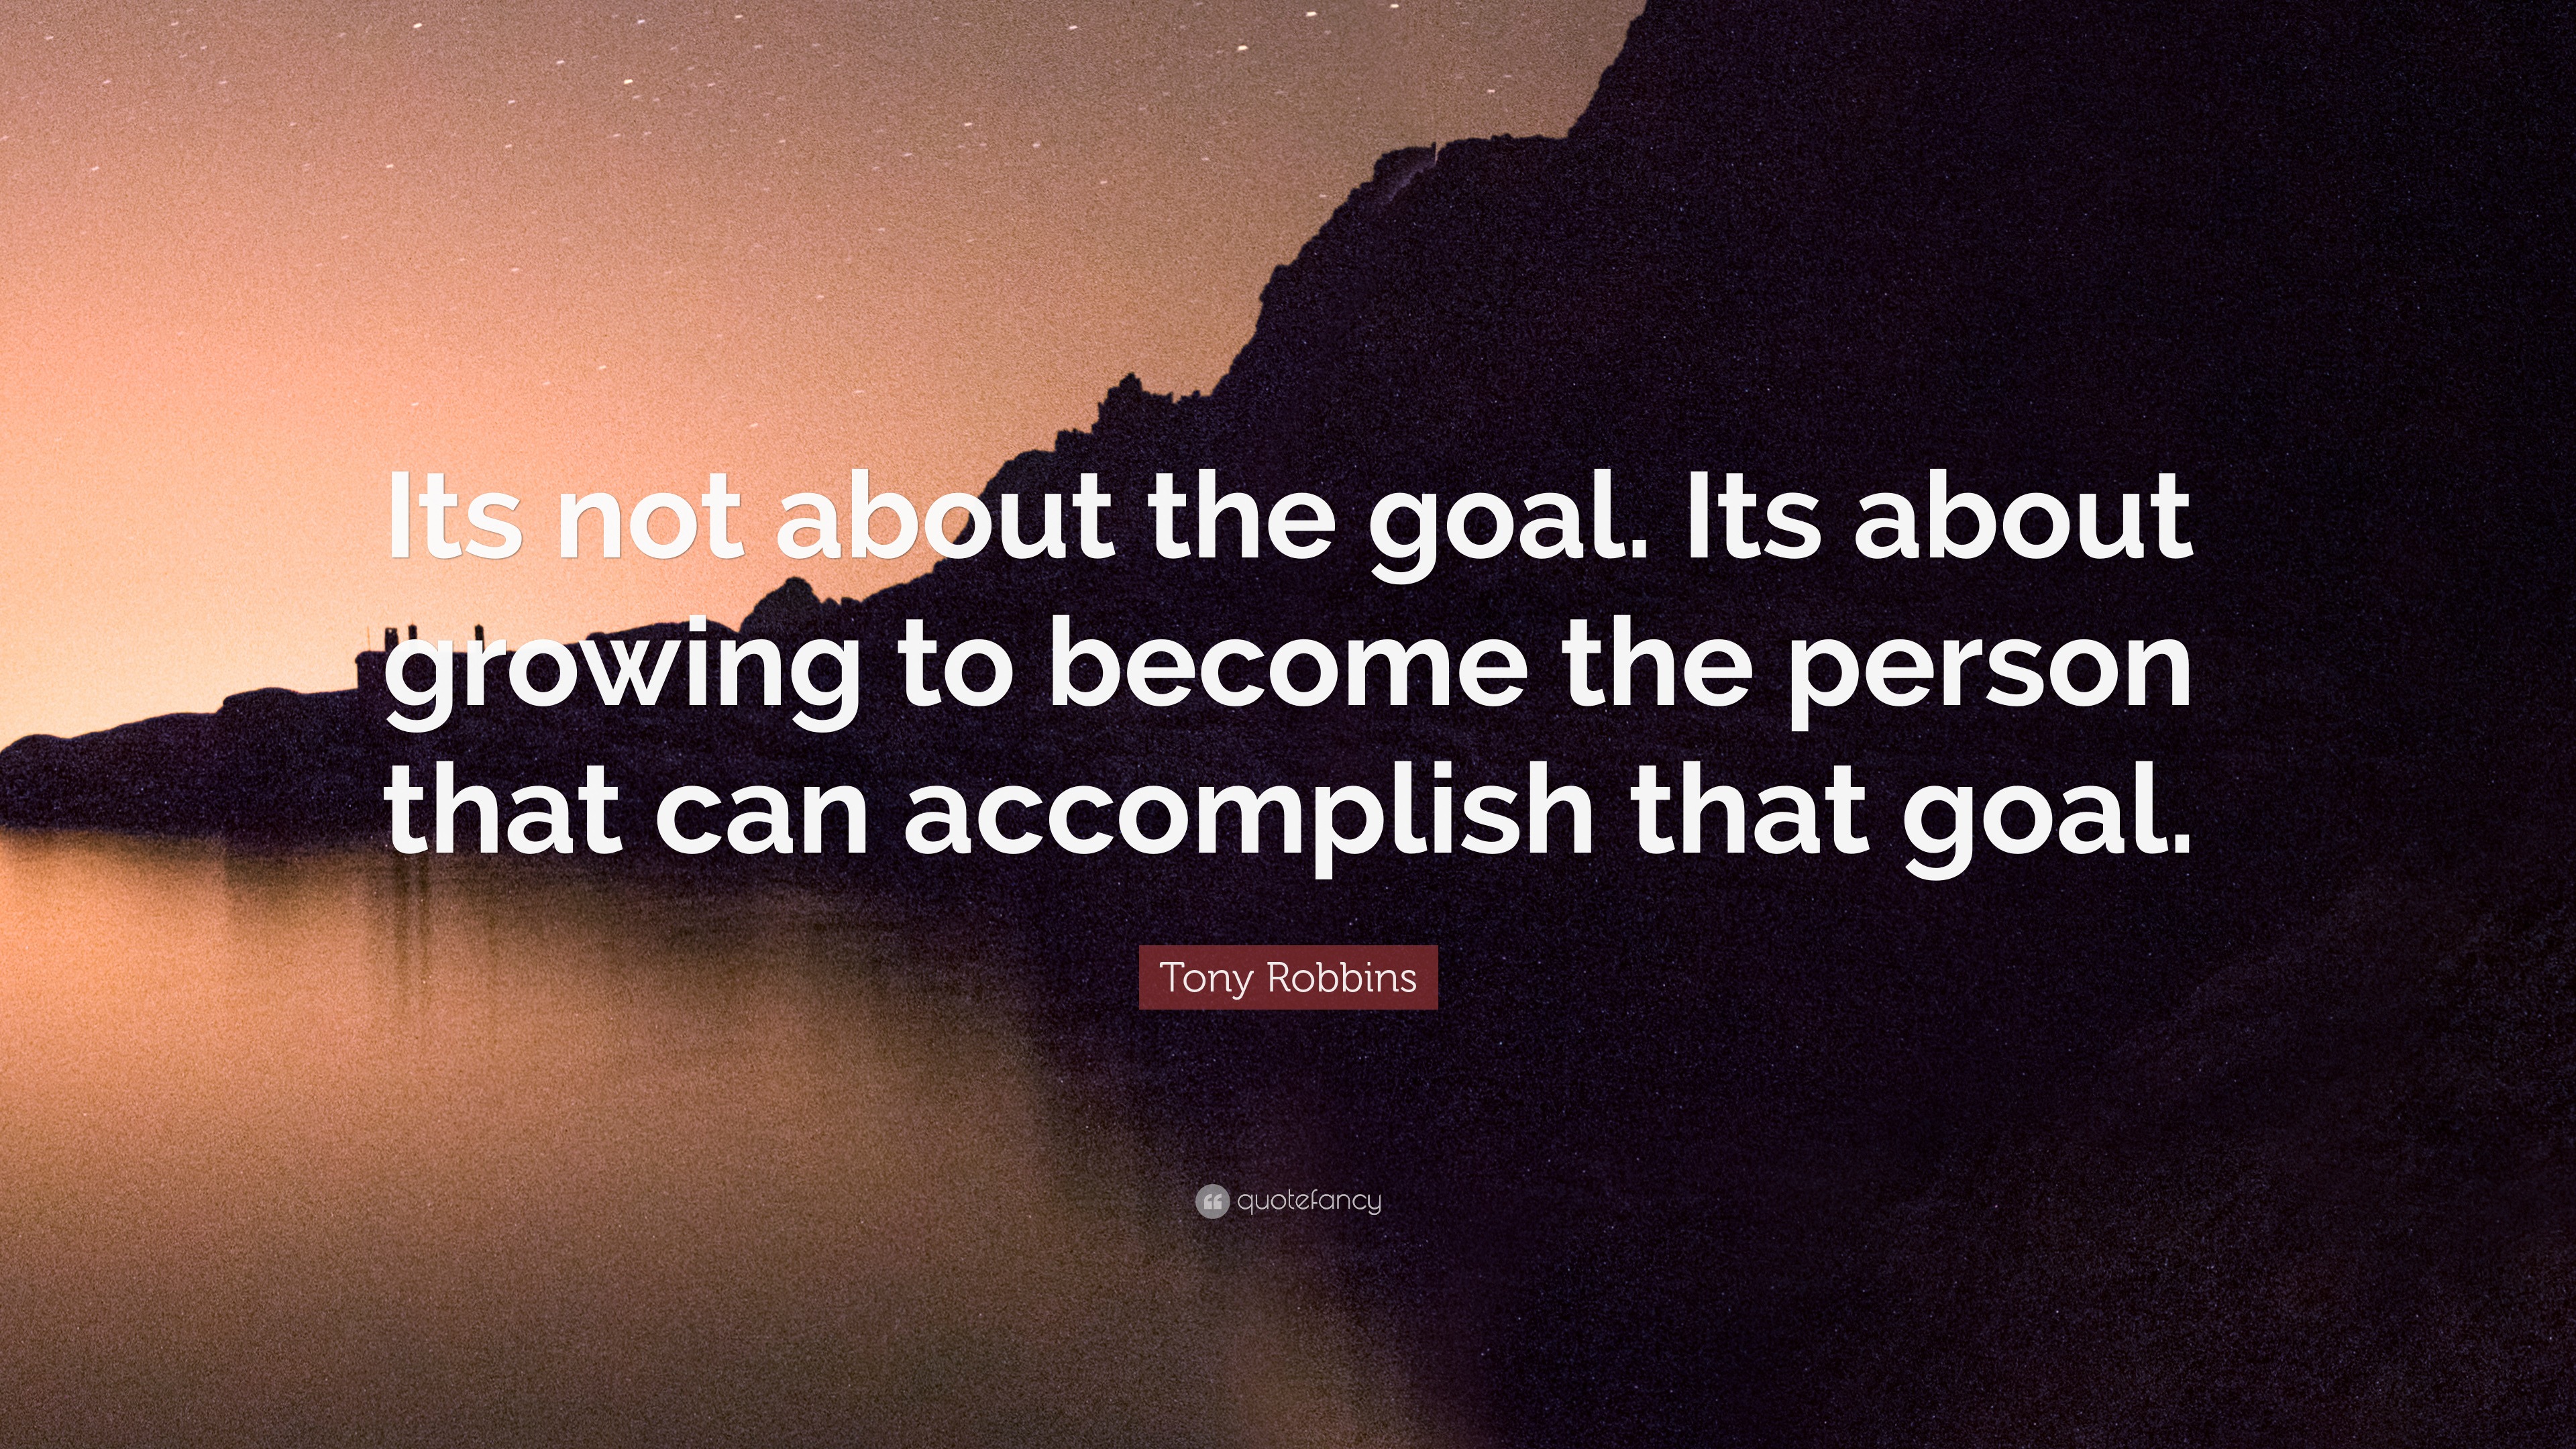 Tony Robbins Quote: “Its not about the goal. Its about growing to ...